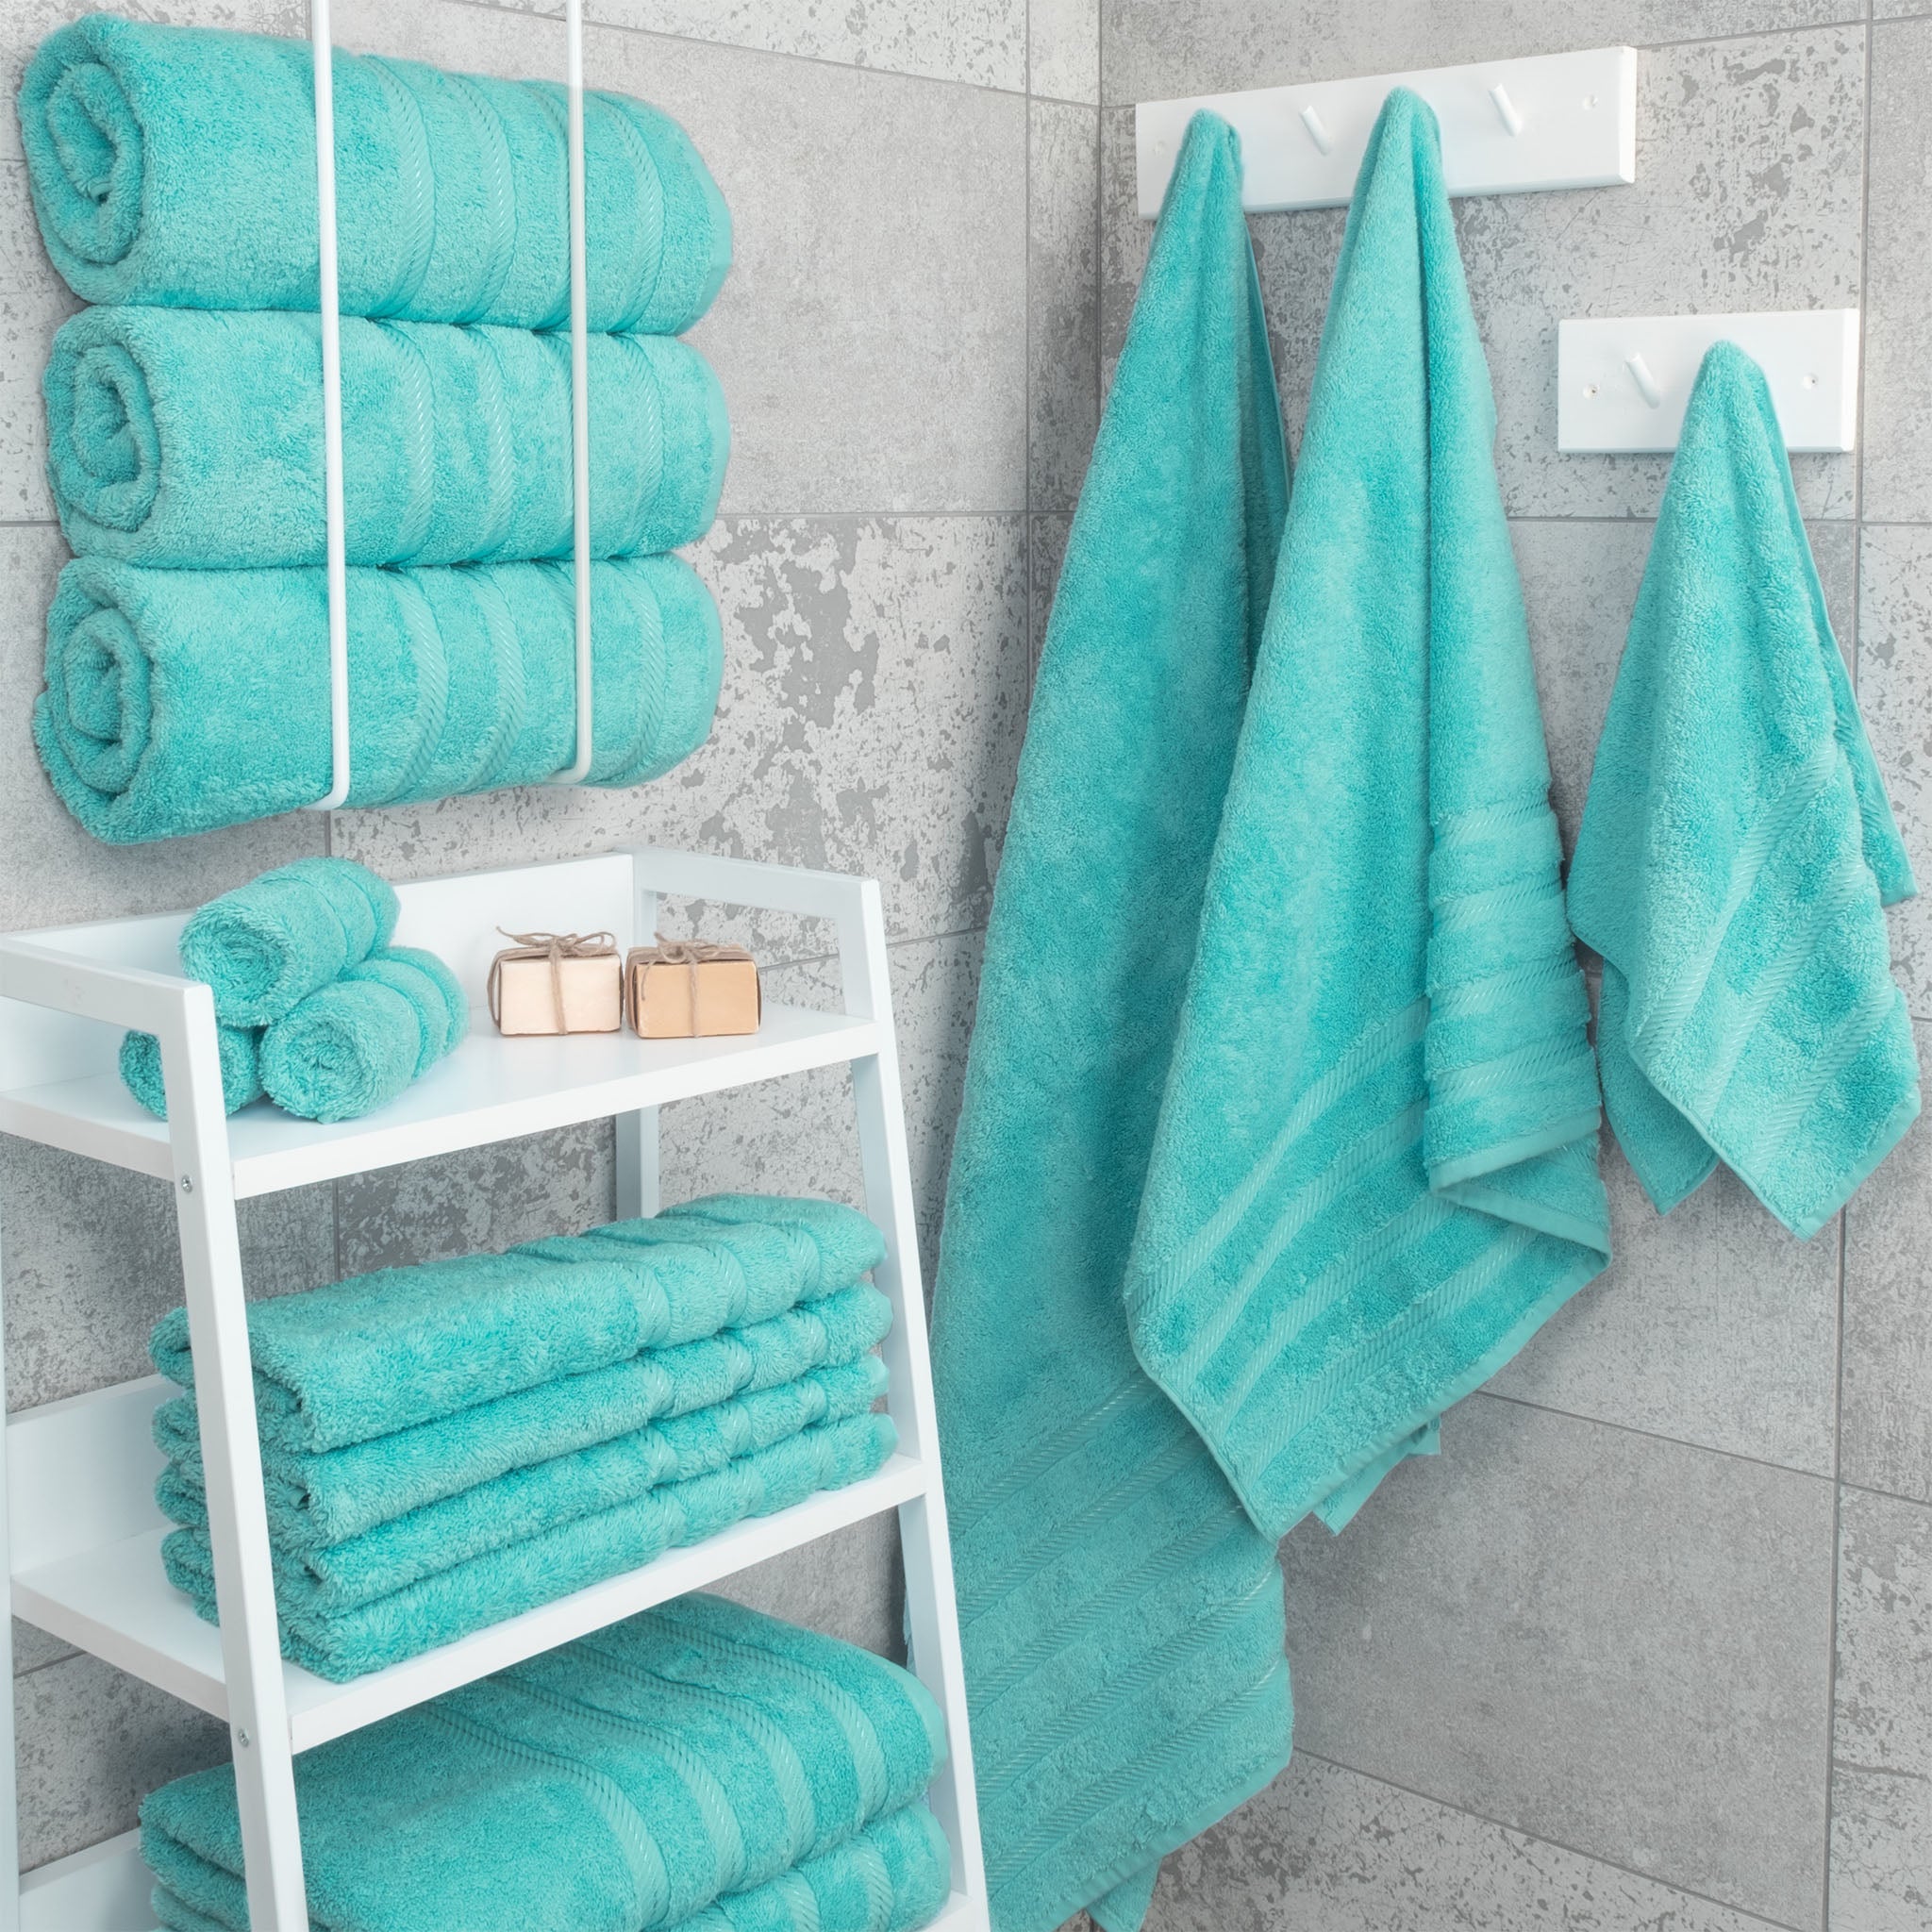 AR LINENS Oversized Bath Towels, 100% Cotton 30x60 Clearance Set of  Oversize Bath Towel Sheets, Soft Absorbent Large Towels for Bathroom, Pool,  Hotel